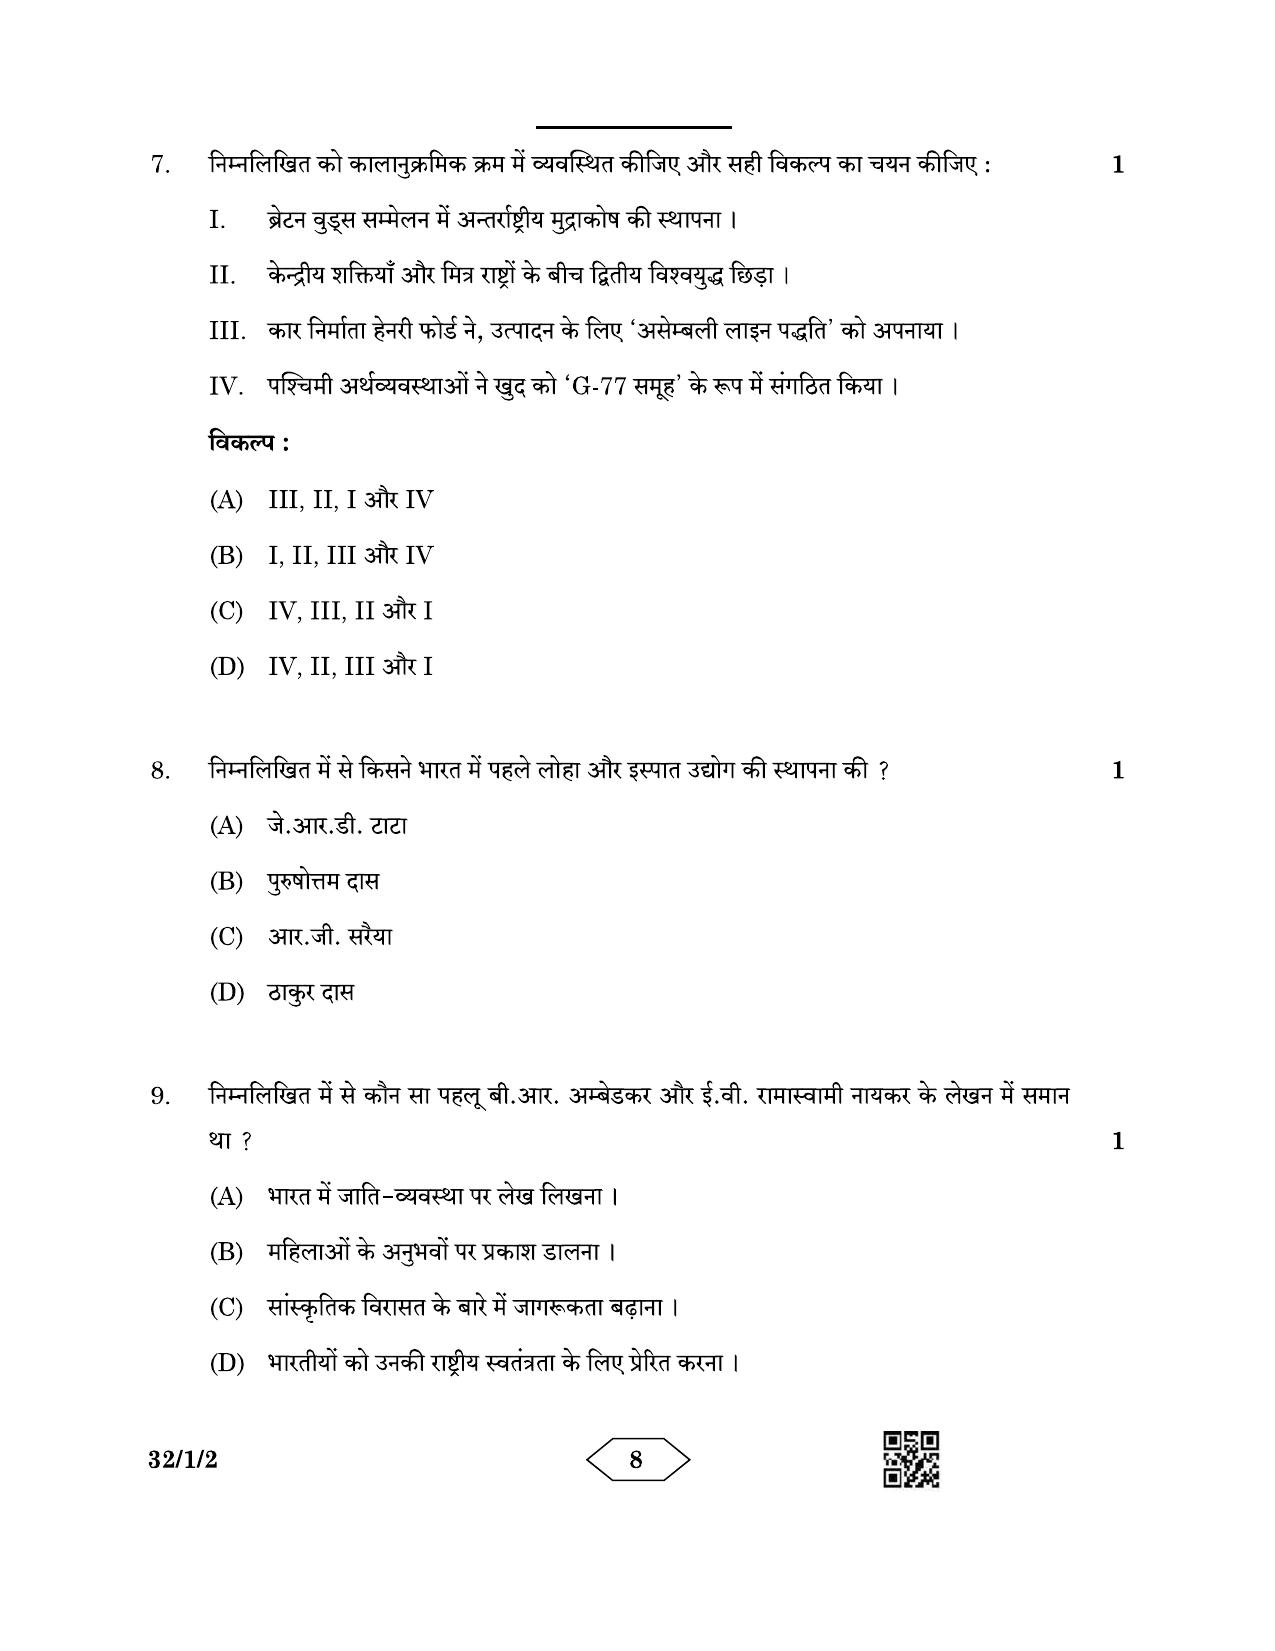 CBSE Class 10 32-1-2 Social Science 2023 Question Paper - Page 8